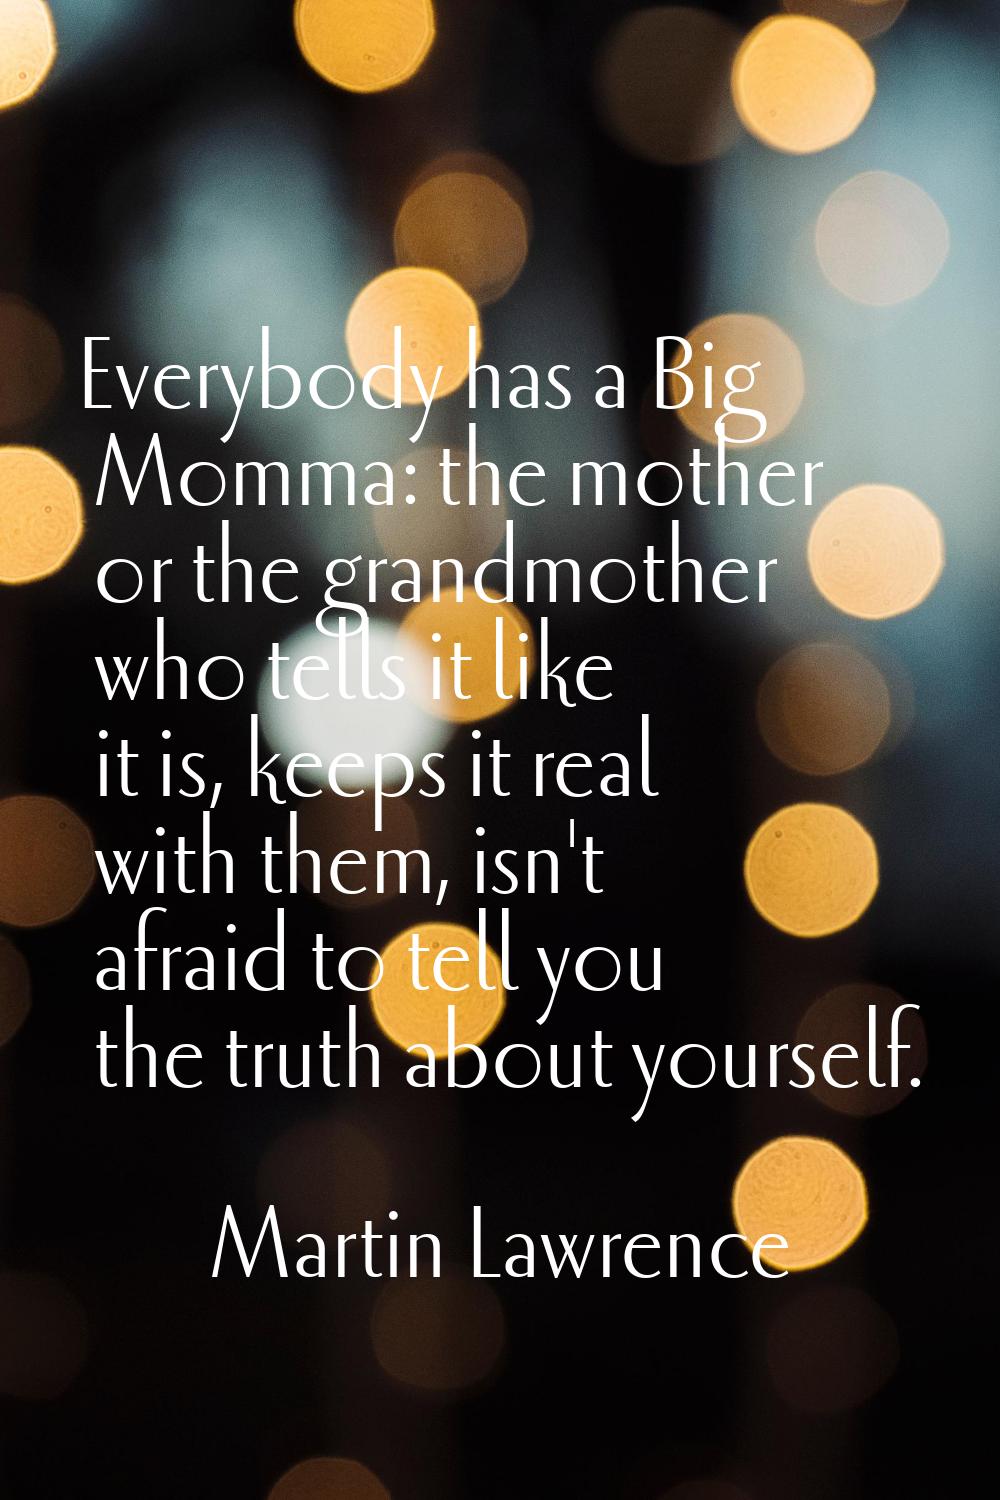 Everybody has a Big Momma: the mother or the grandmother who tells it like it is, keeps it real wit